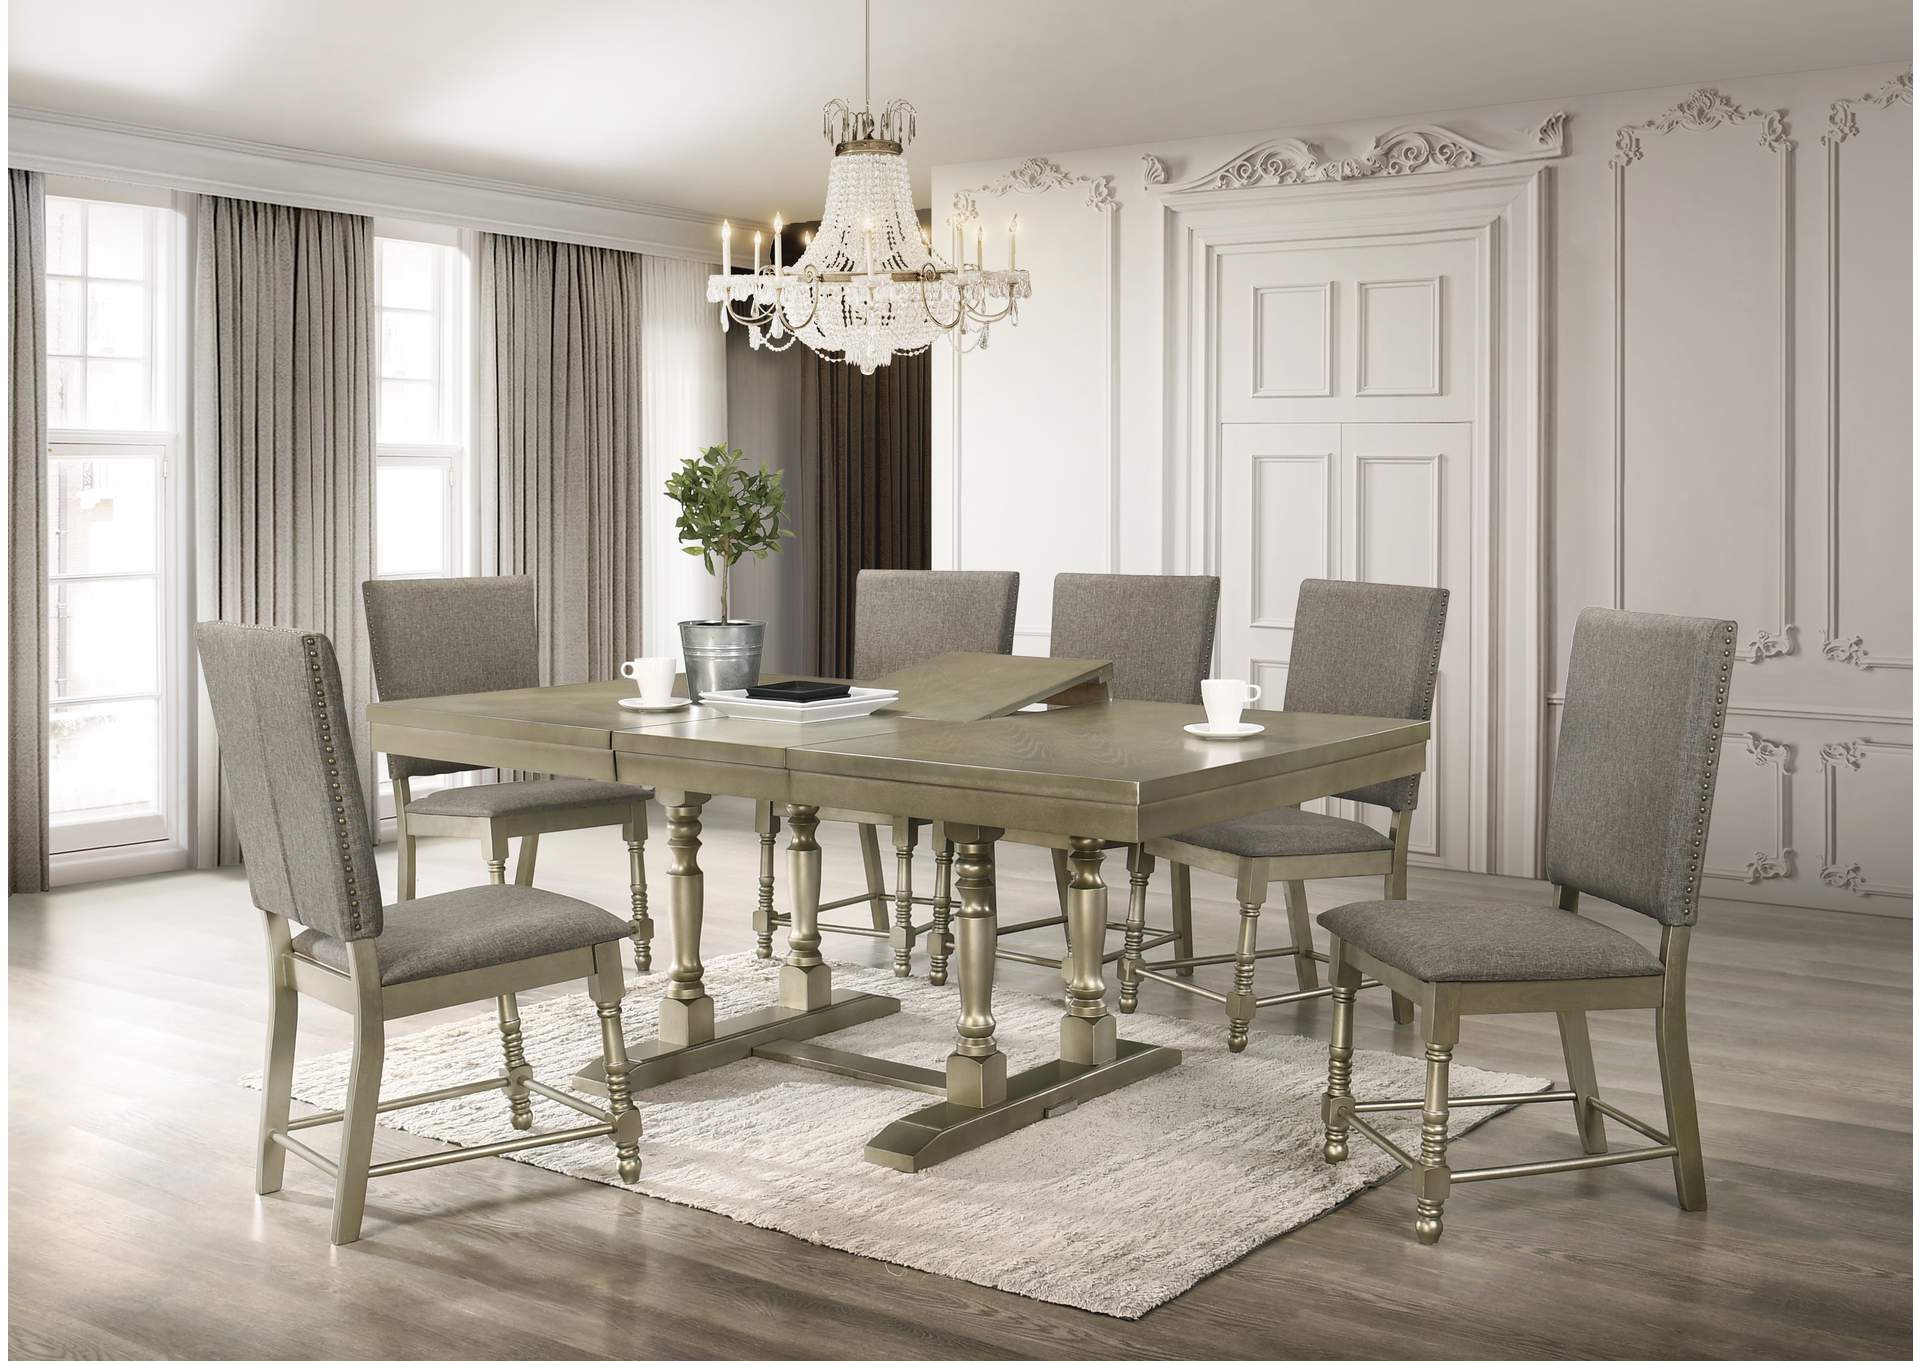 Eden Gold & Gray 7 Piece Dining Set -Table W/ 6 Side Chairs,Cosmos Furniture